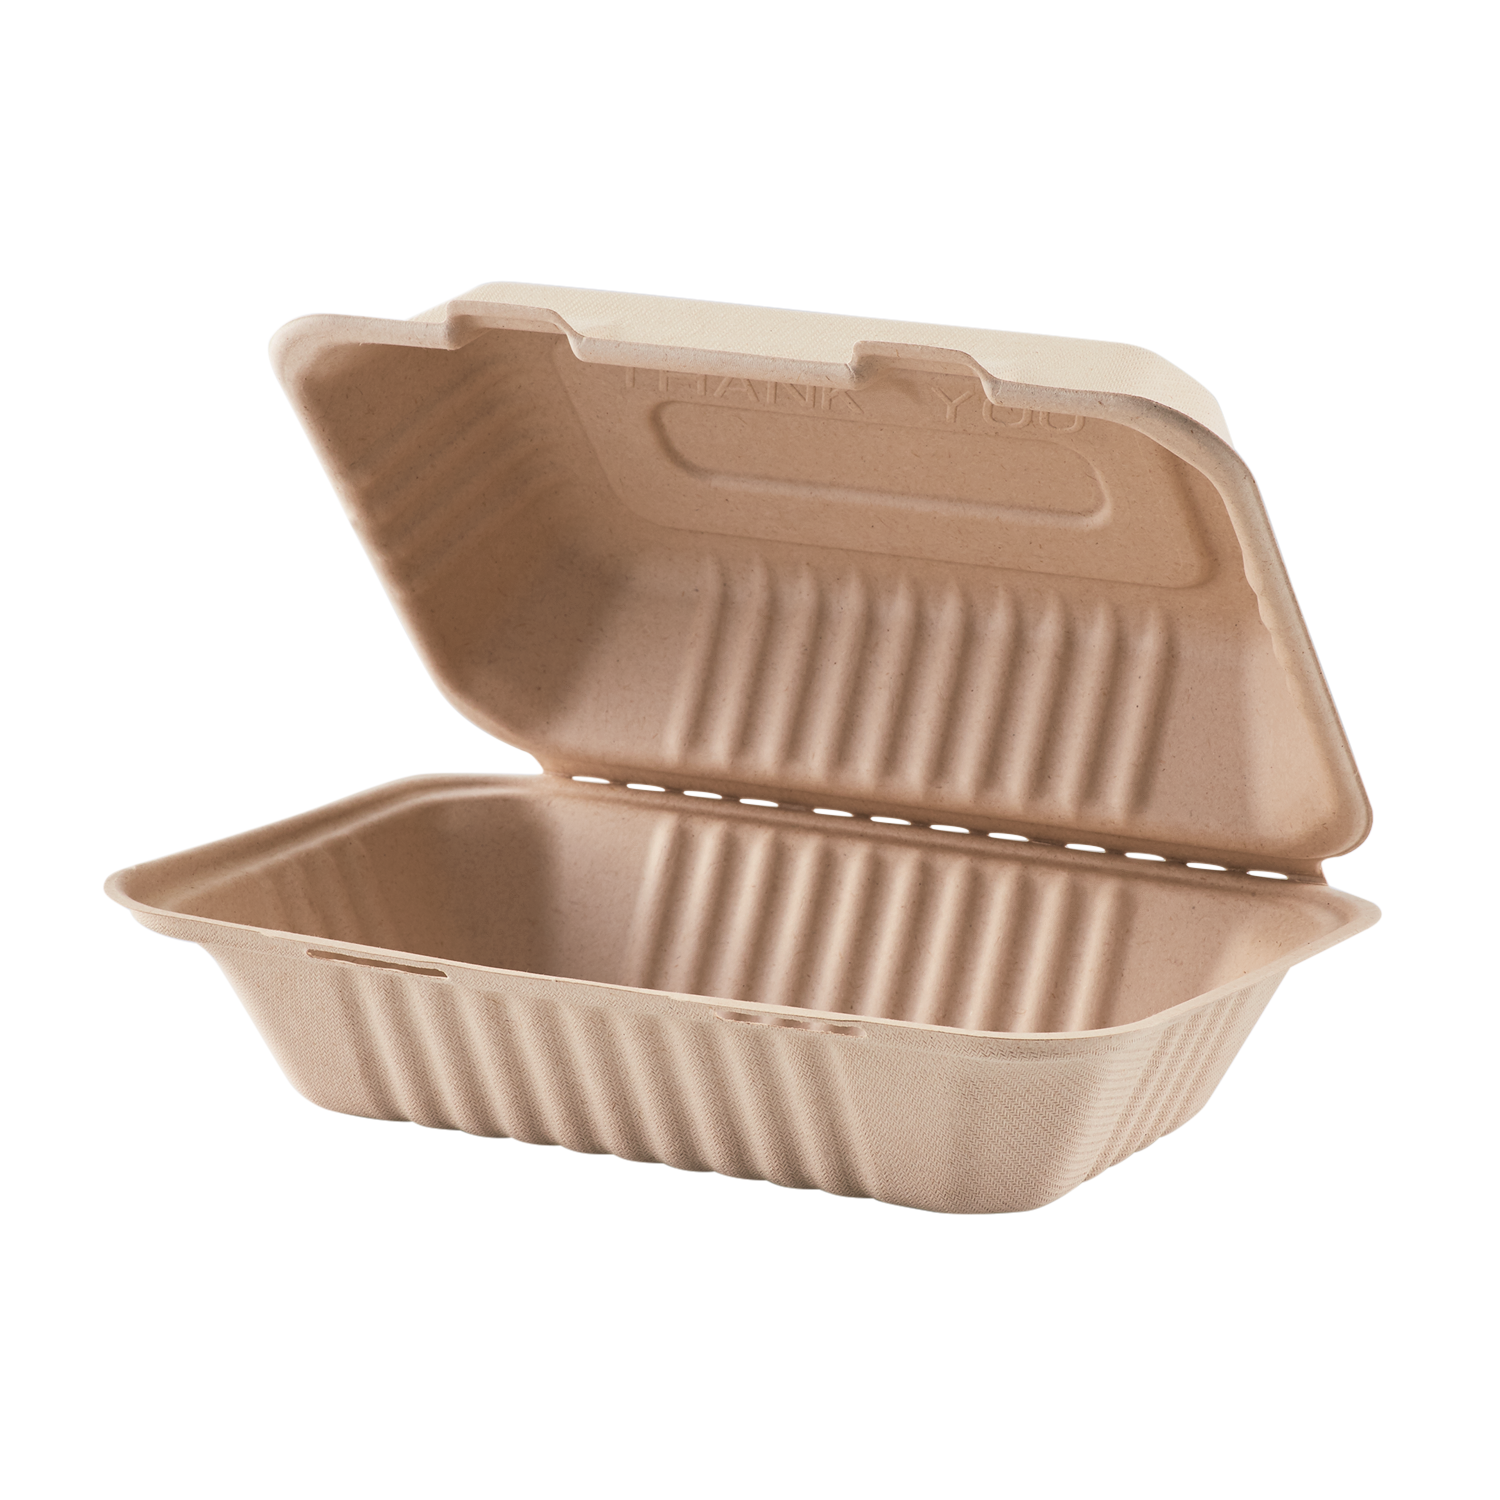 Disposable Food Containers